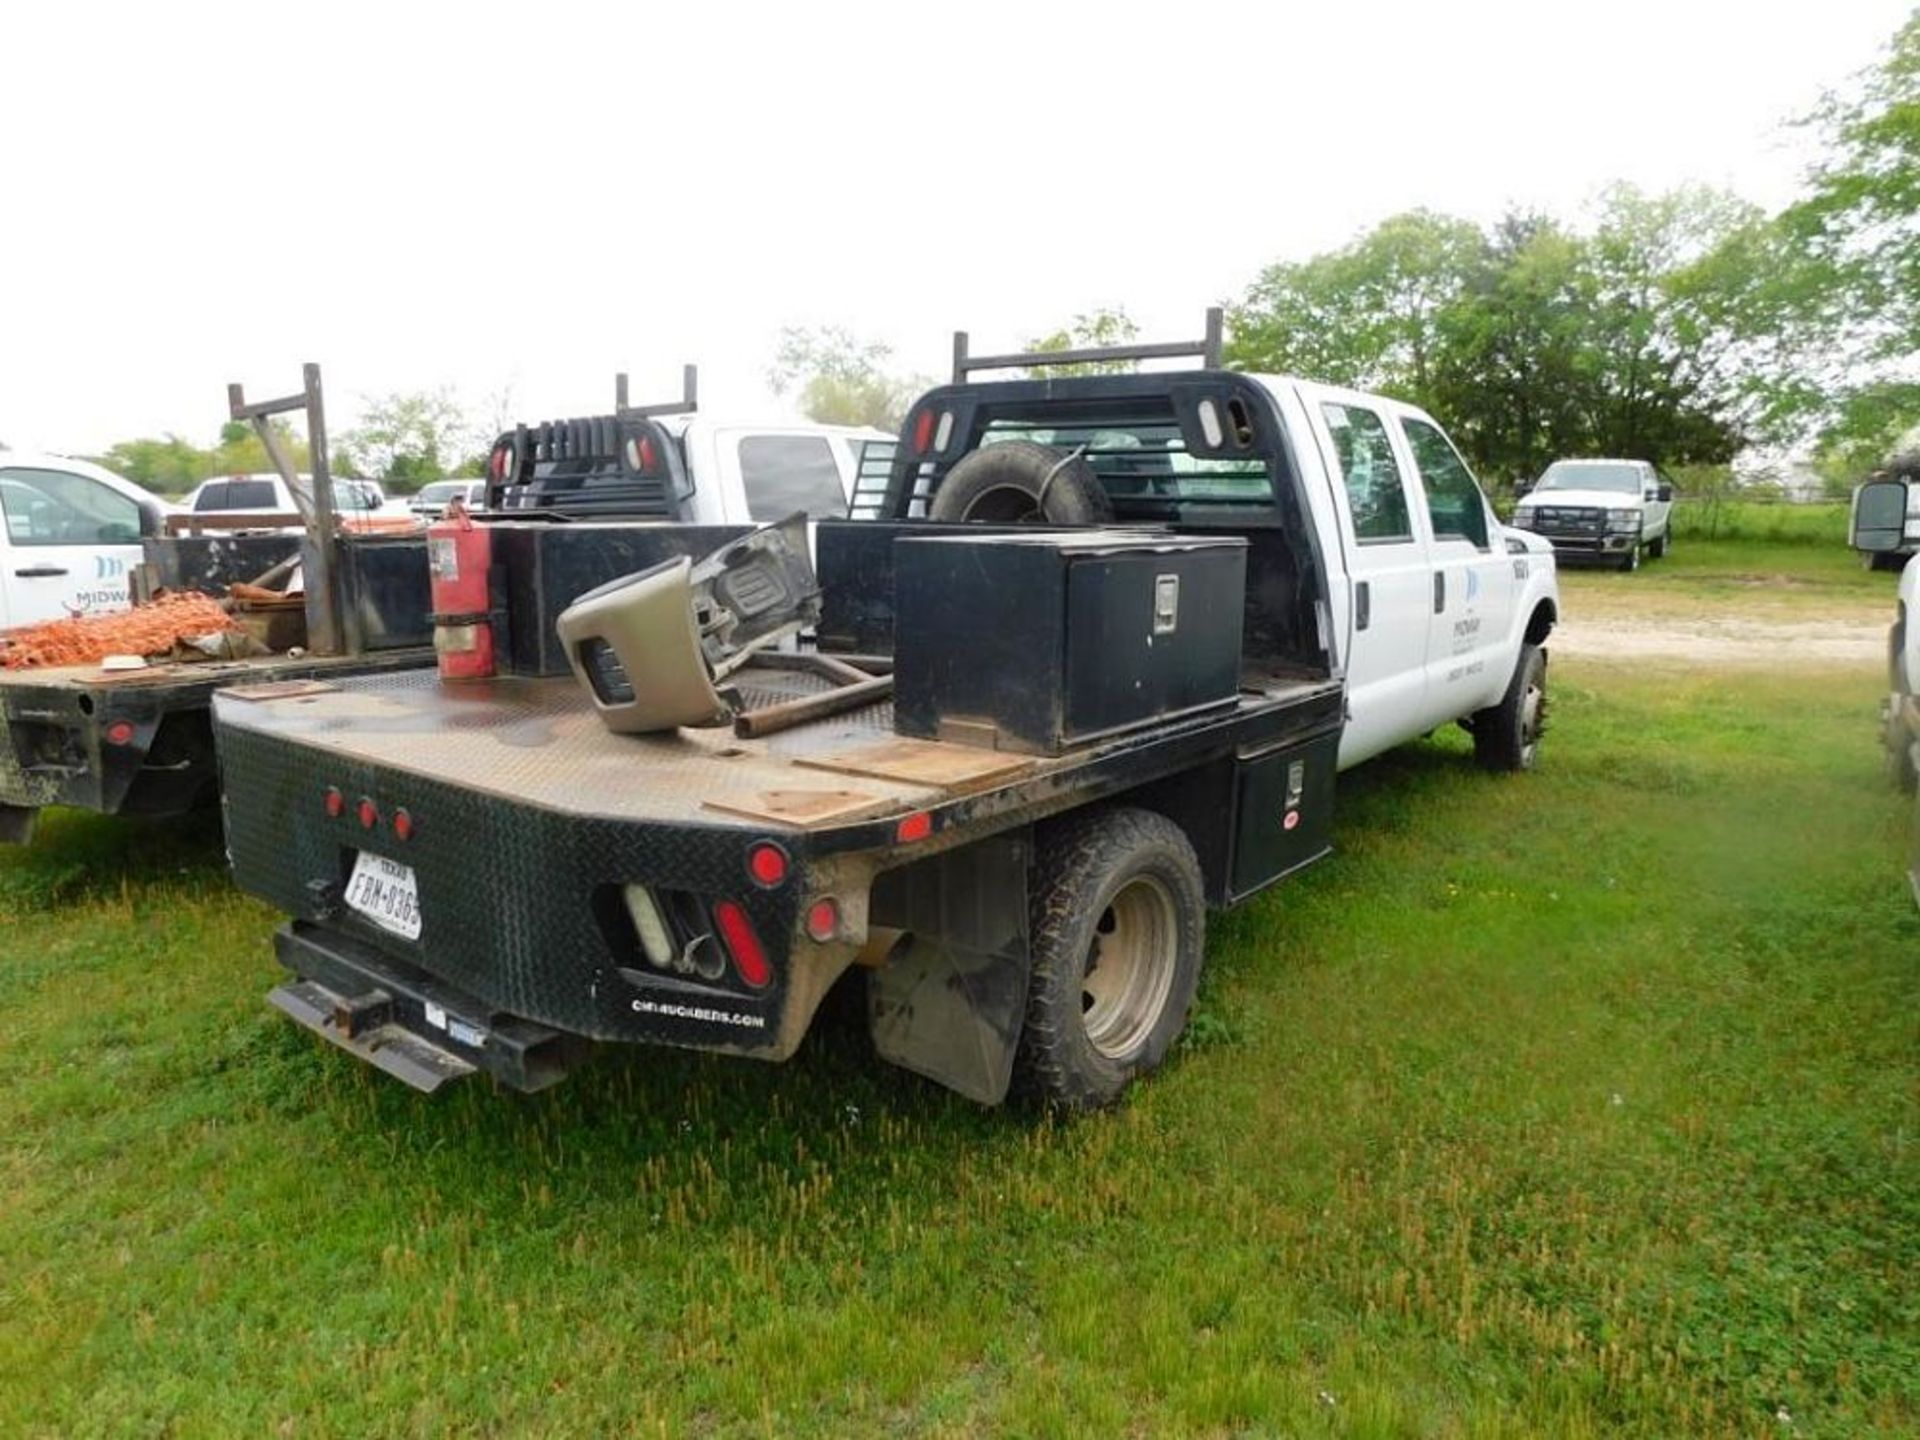 2015 Ford F-350 Super Duty 4x4 Crew Cab Flatbed Truck, 9 ft. Flatbed with Tool Boxes (needs engine & - Image 3 of 3